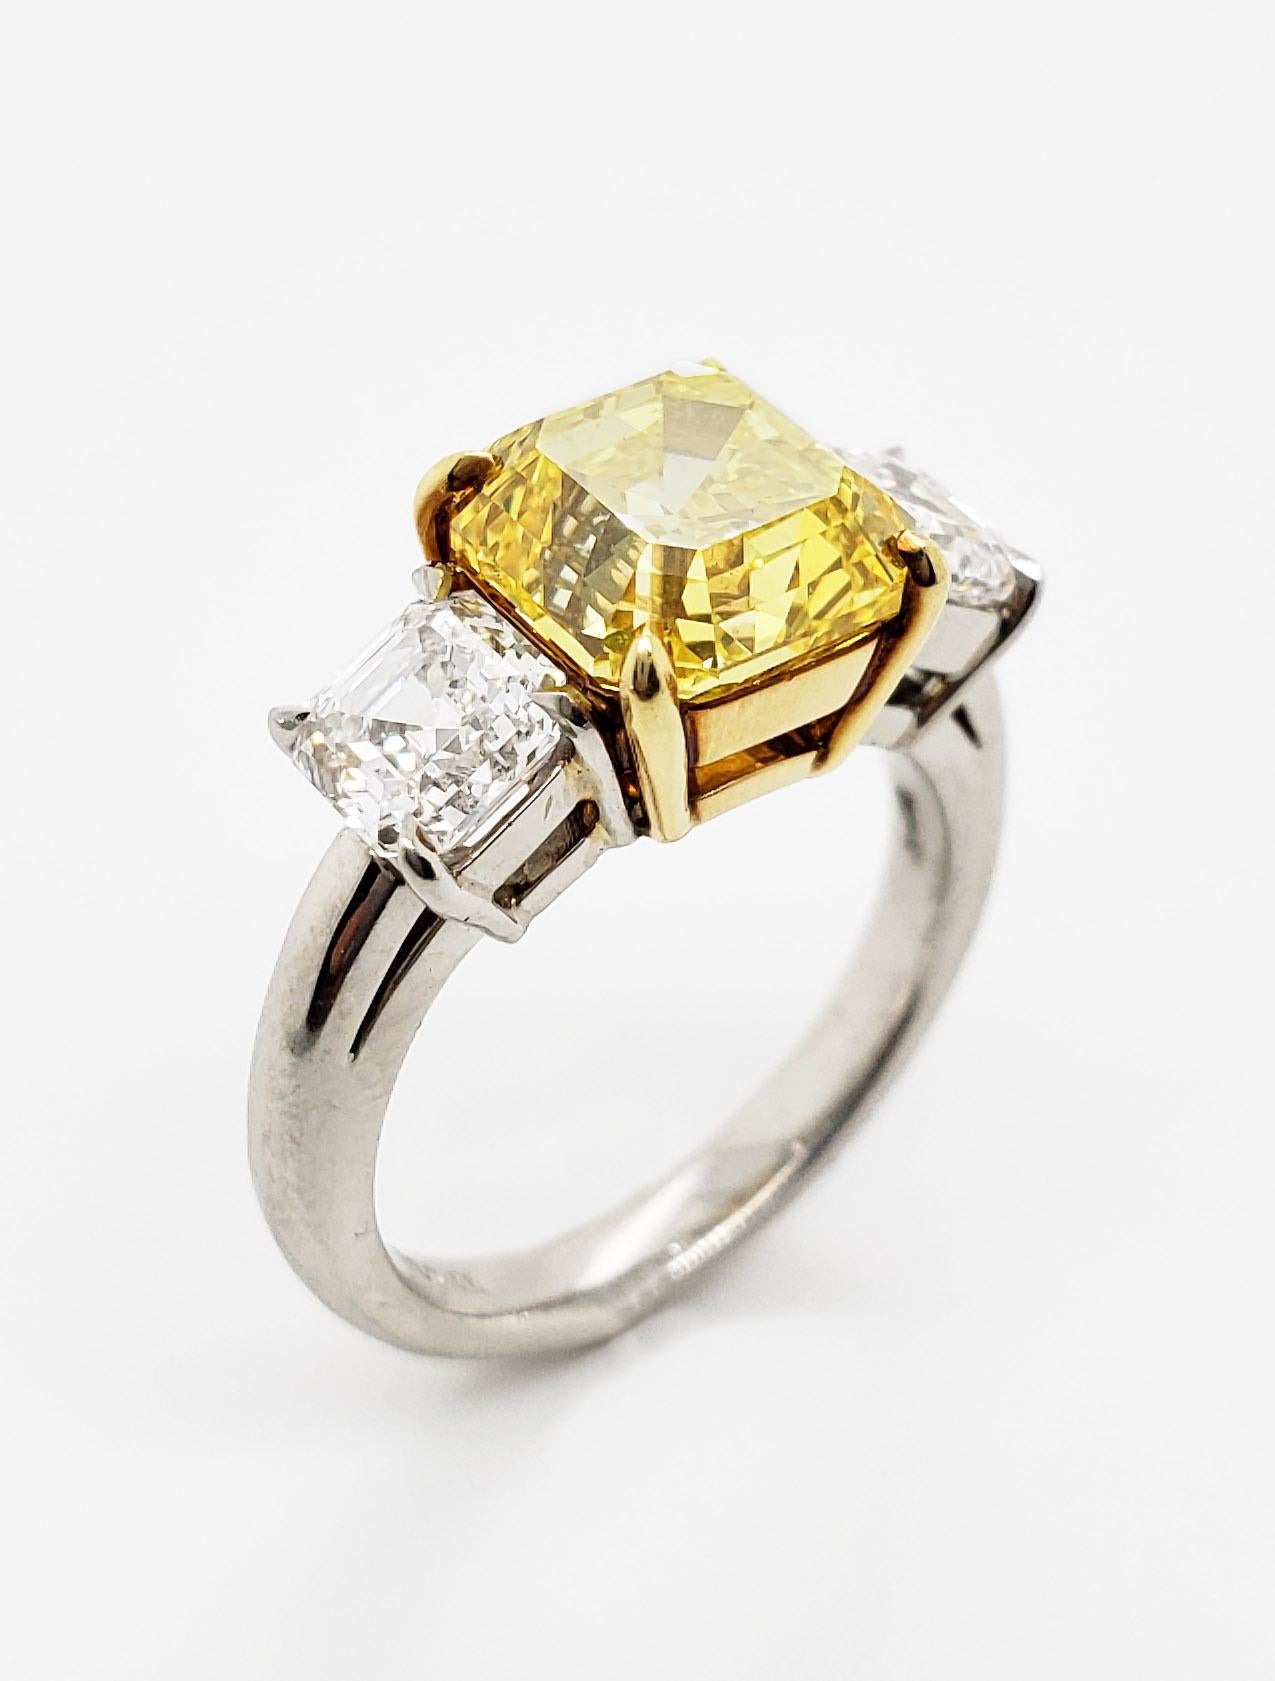 Scarselli 4 Carat Fancy Vivid Yellow Asscher Cut Diamond Ring, Platinum GIA In New Condition In New York, NY